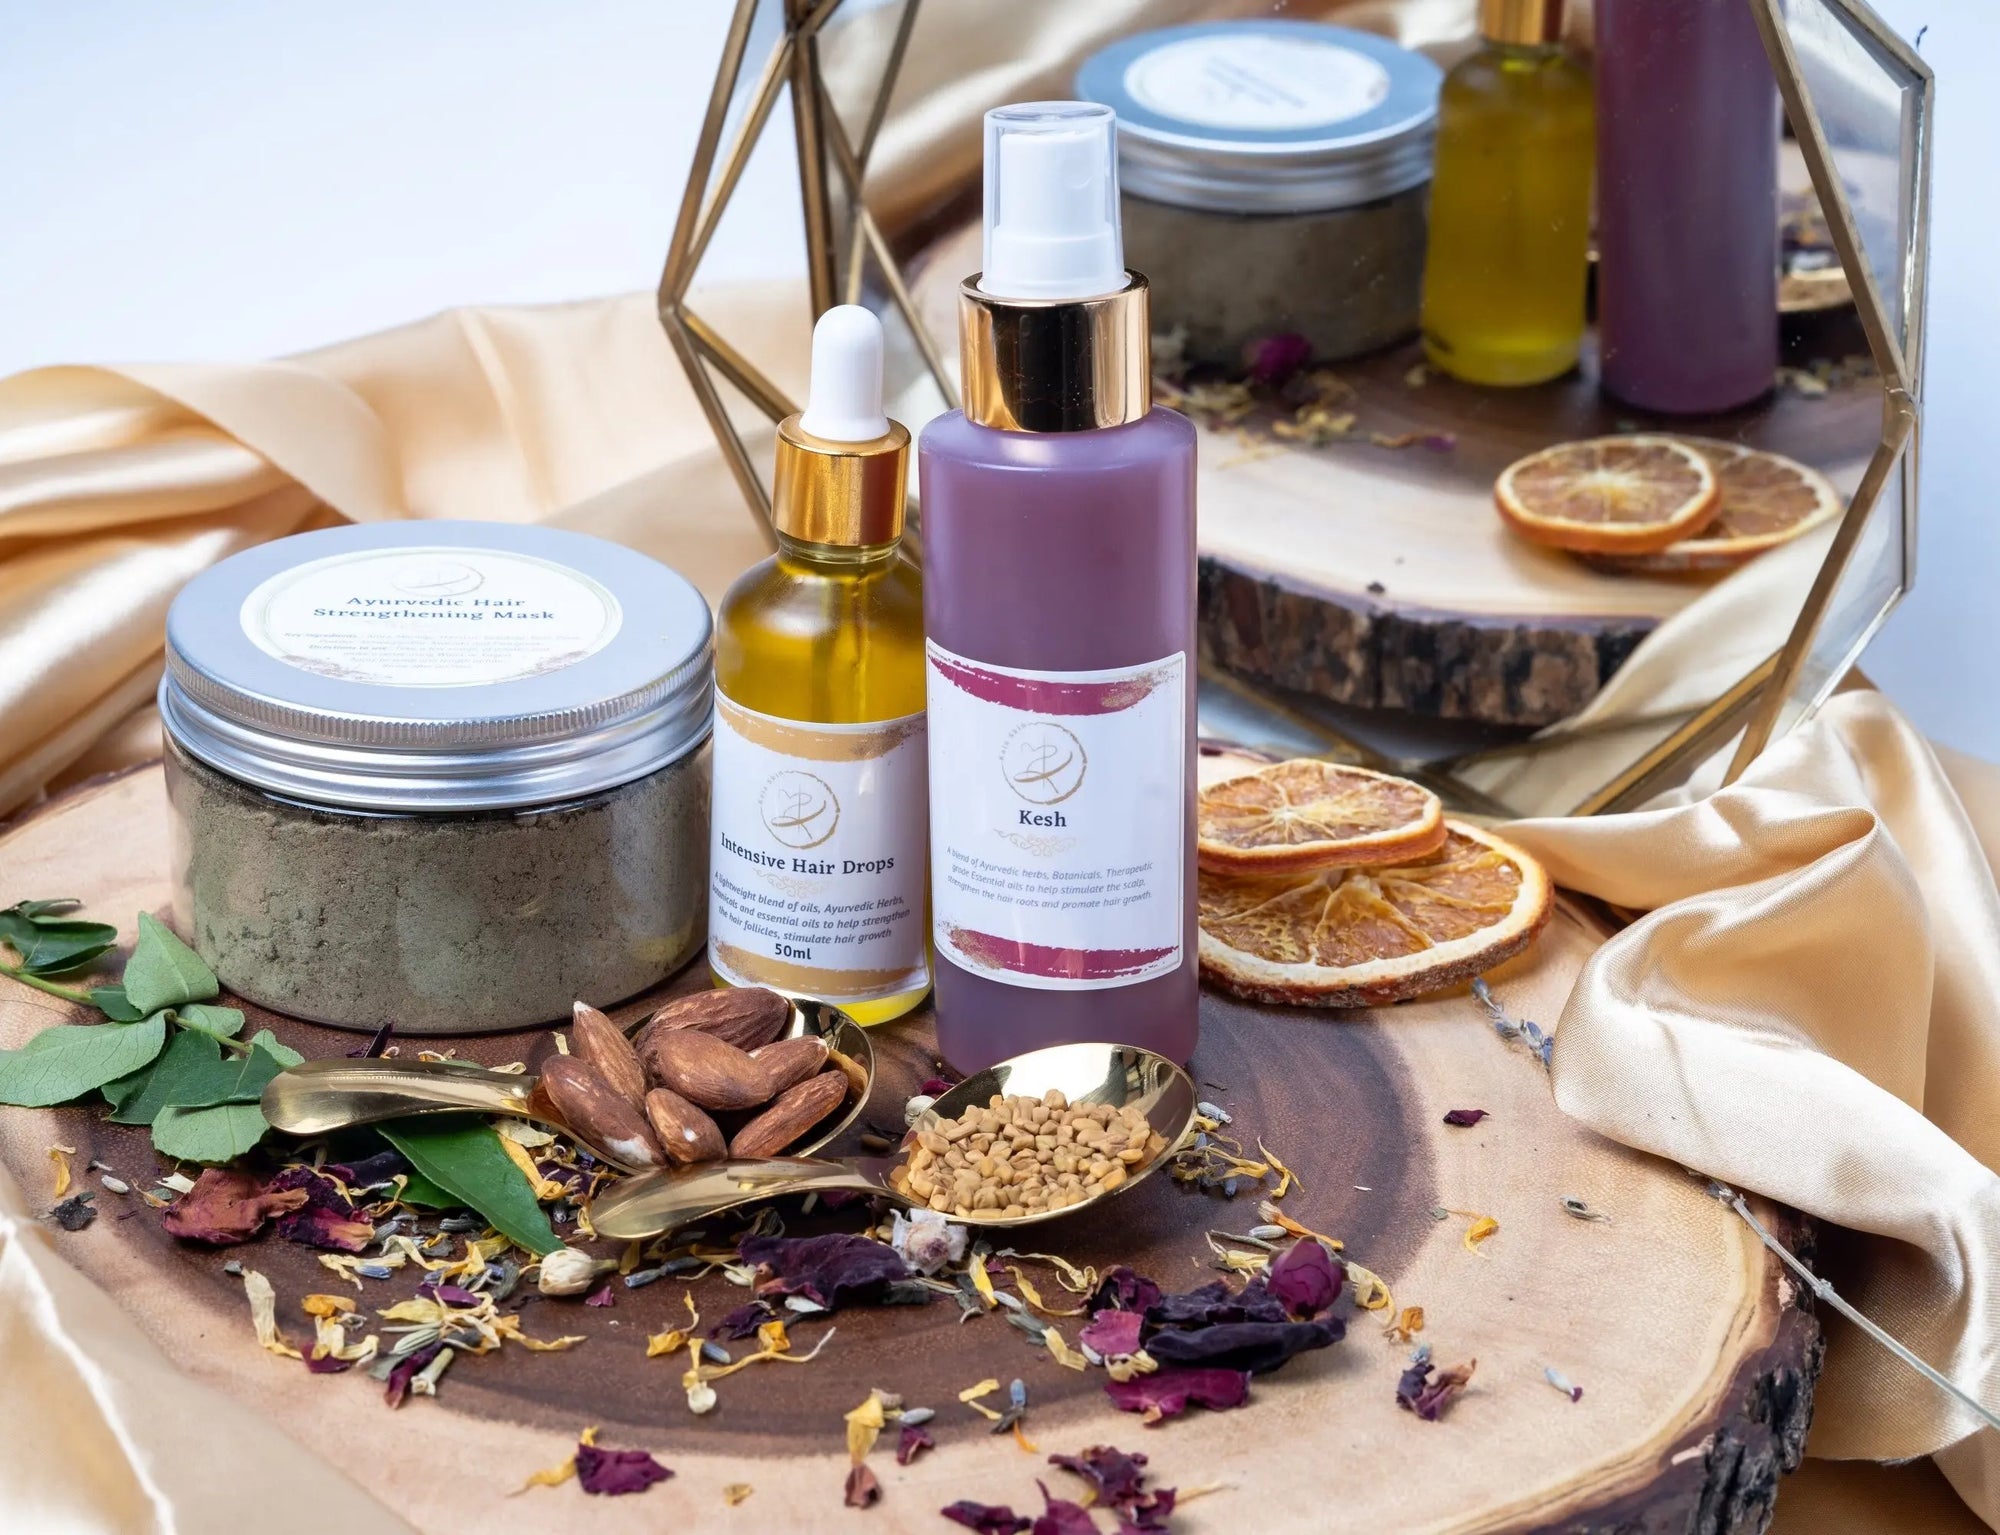 Are you open to bringing the Power of Ayurvedic herbs into your Hair Care Ritual? Kaia Skin